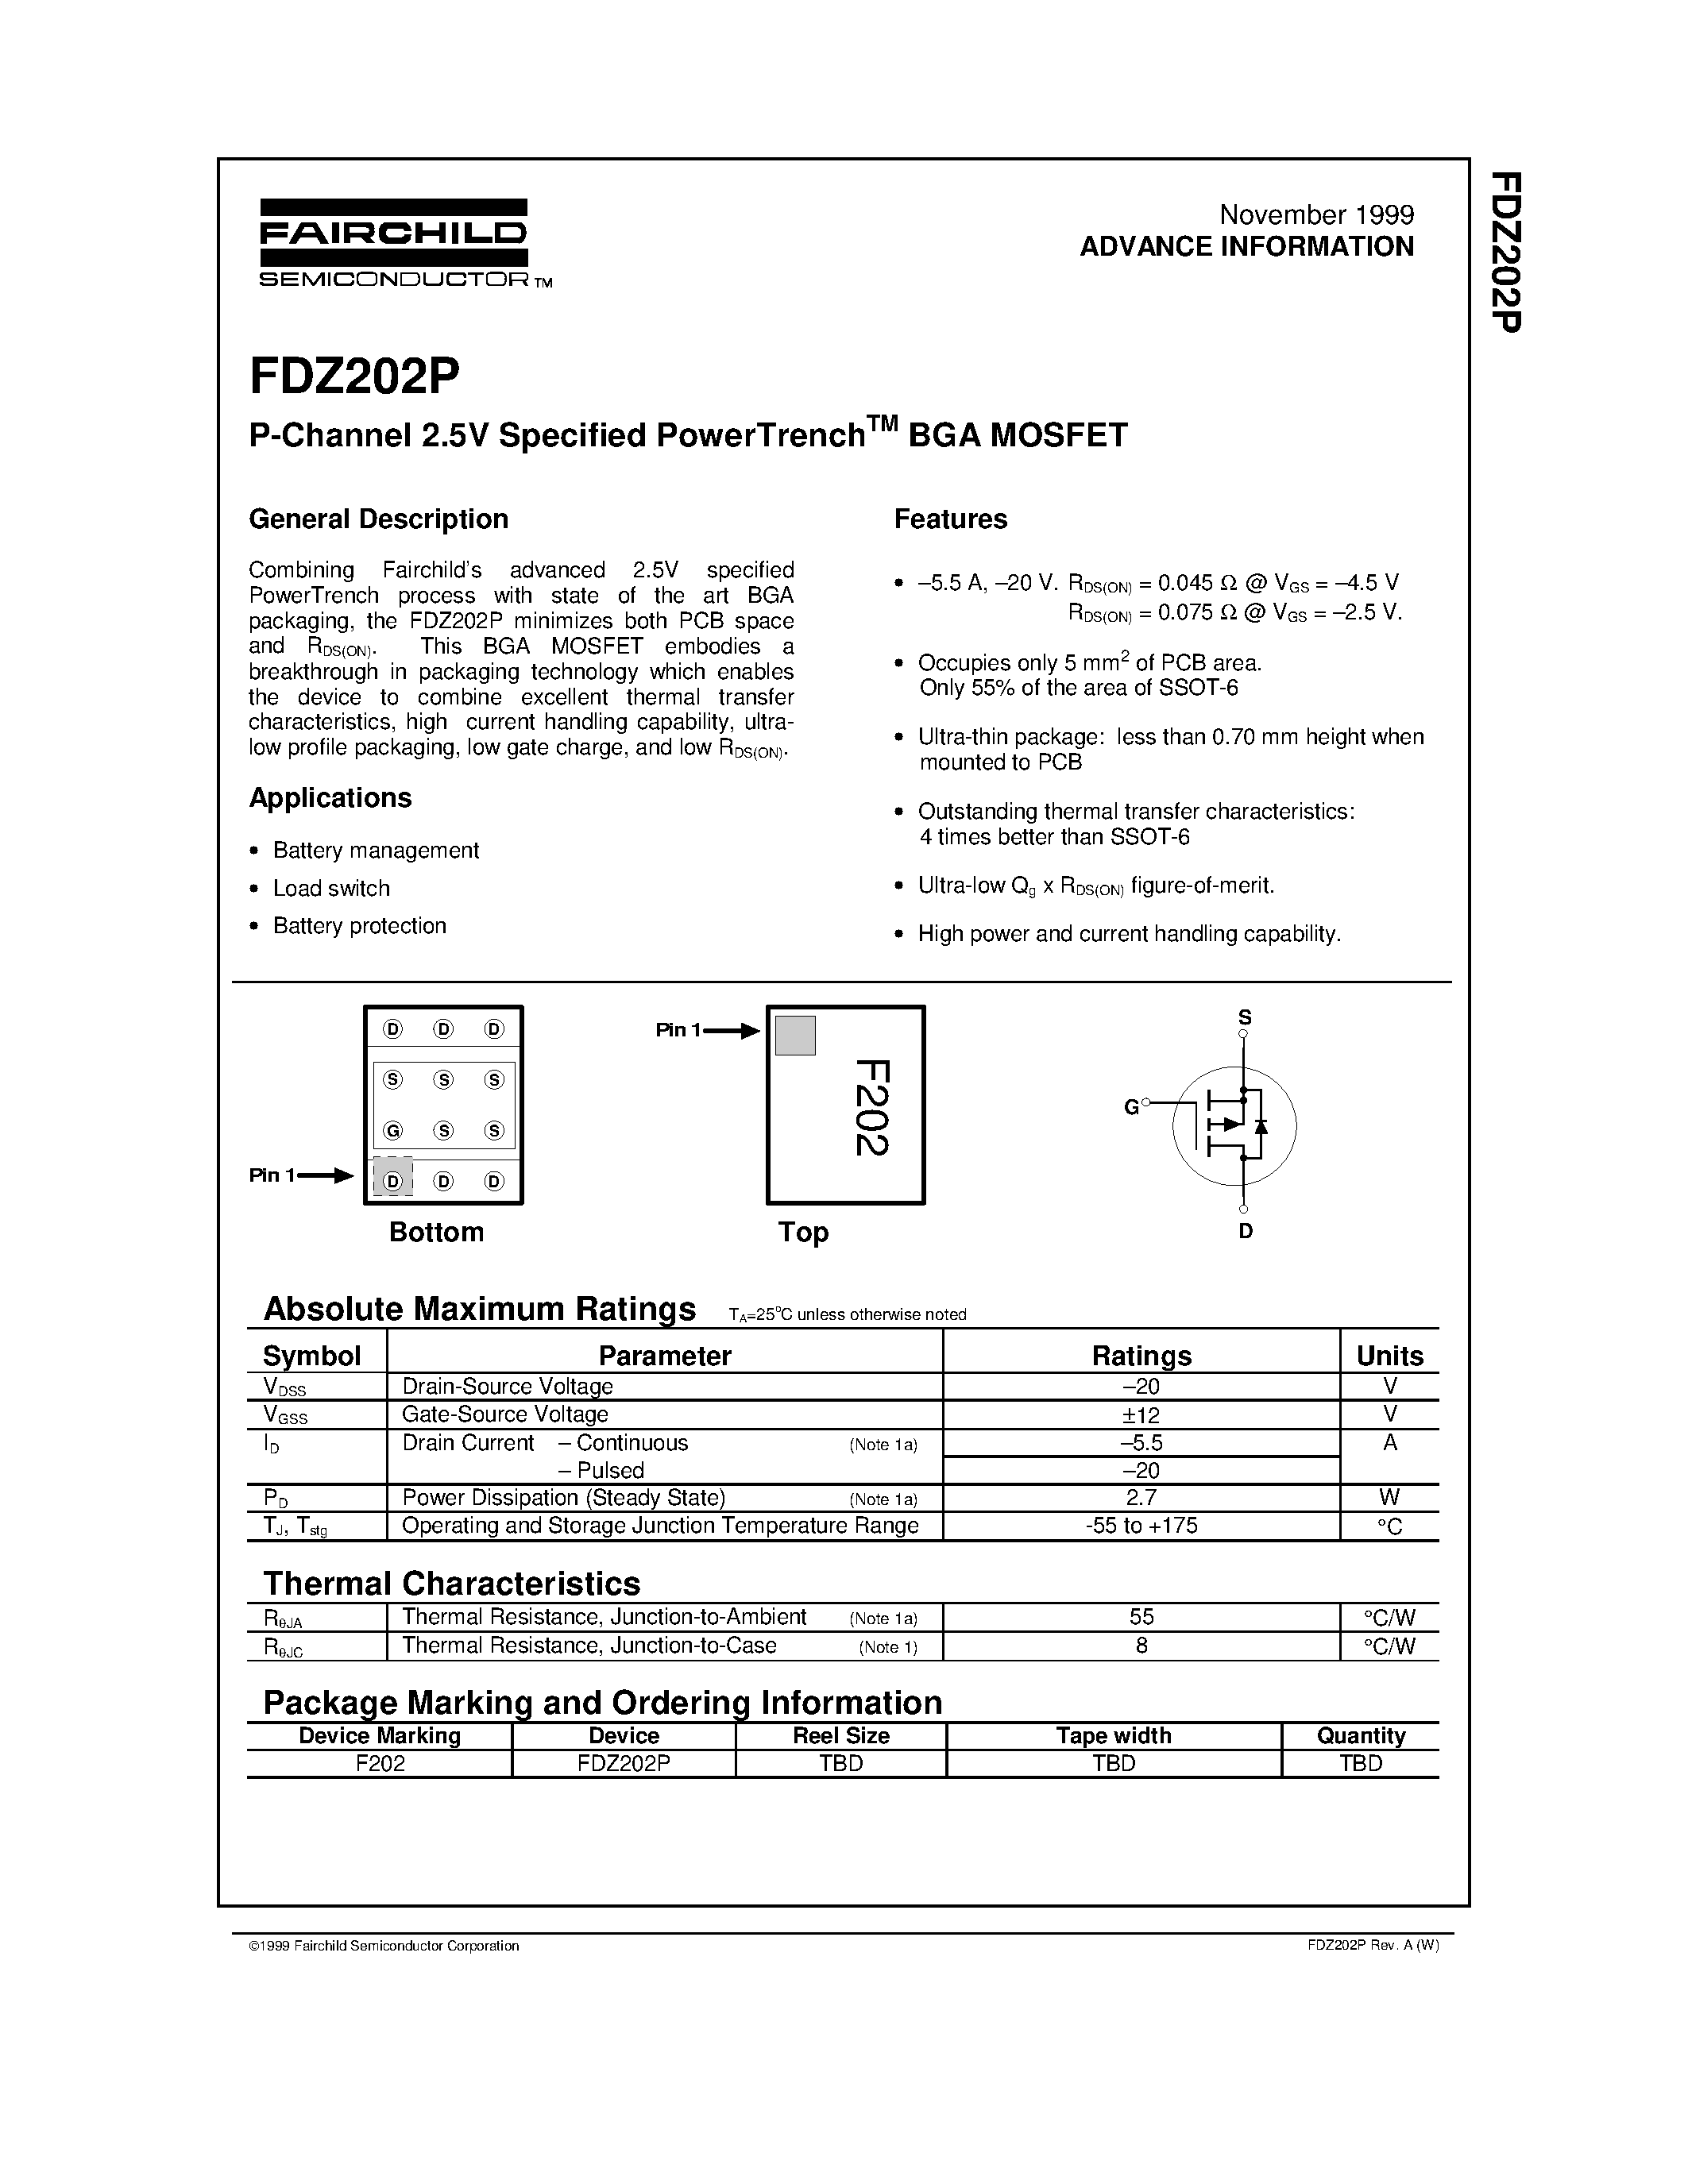 Datasheet FDZ202P - P-Channel 2.5V Specified PowerTrenchTM BGA MOSFET page 1